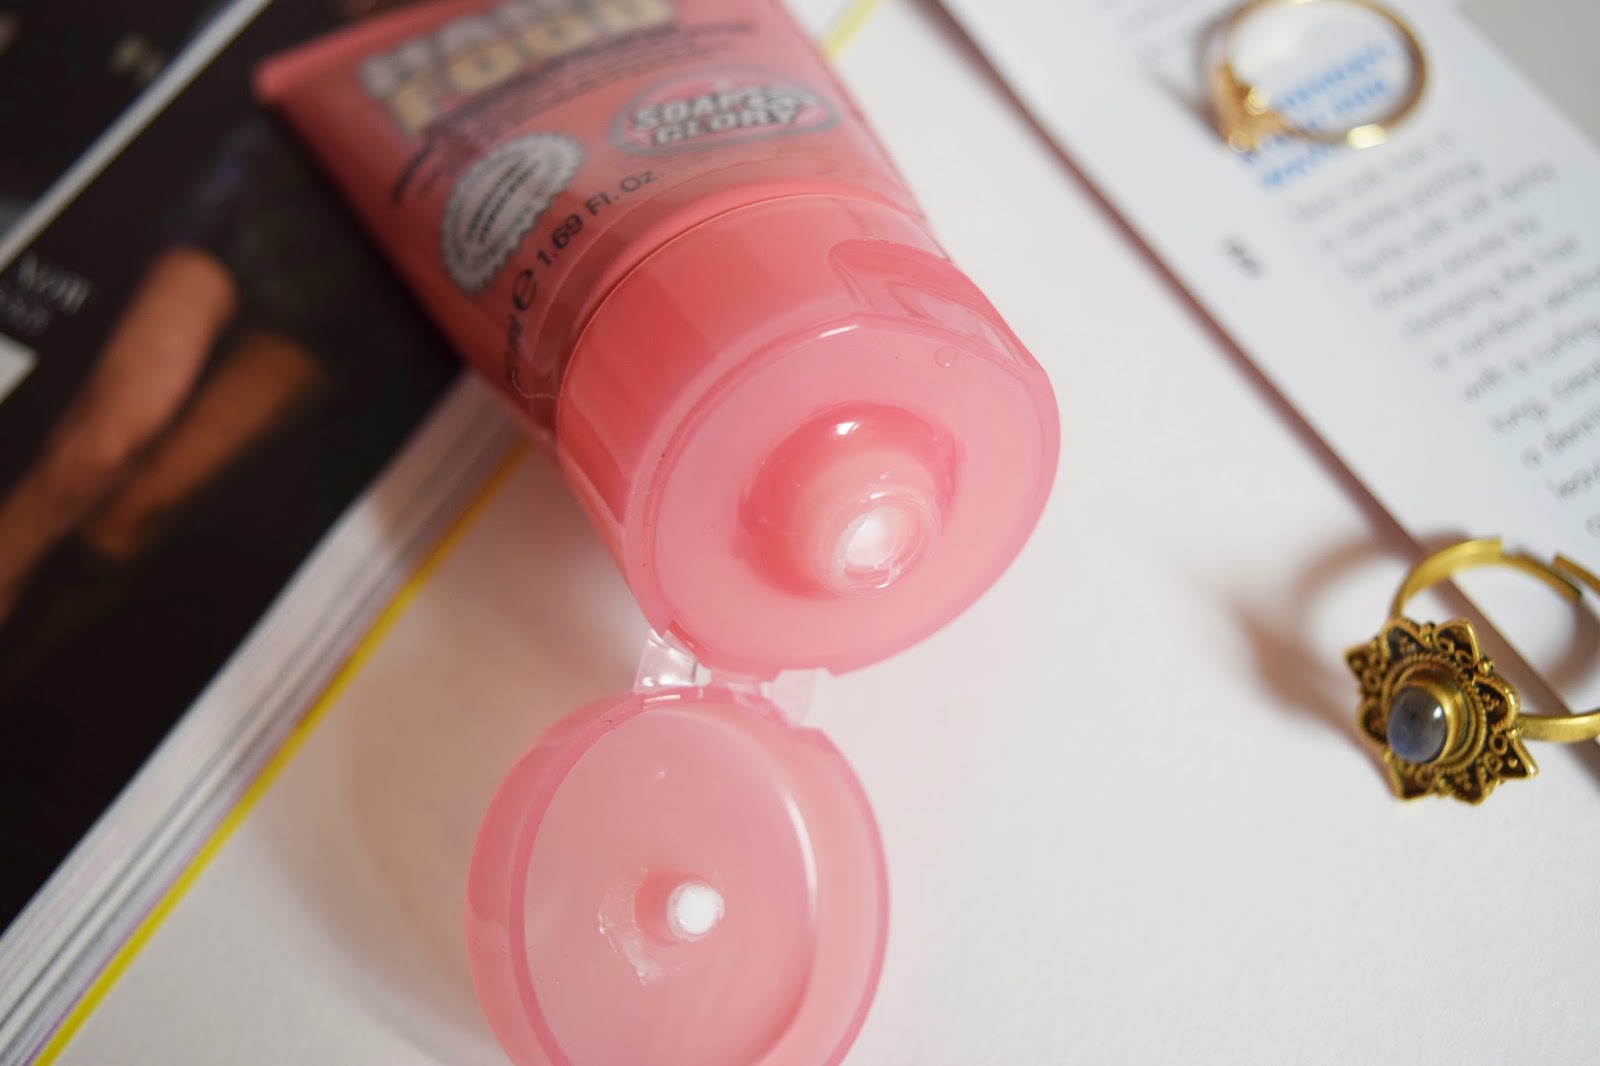 THE TUBE OF SOAP AND GLORY HAND FOOD WITH THE LID OPEN